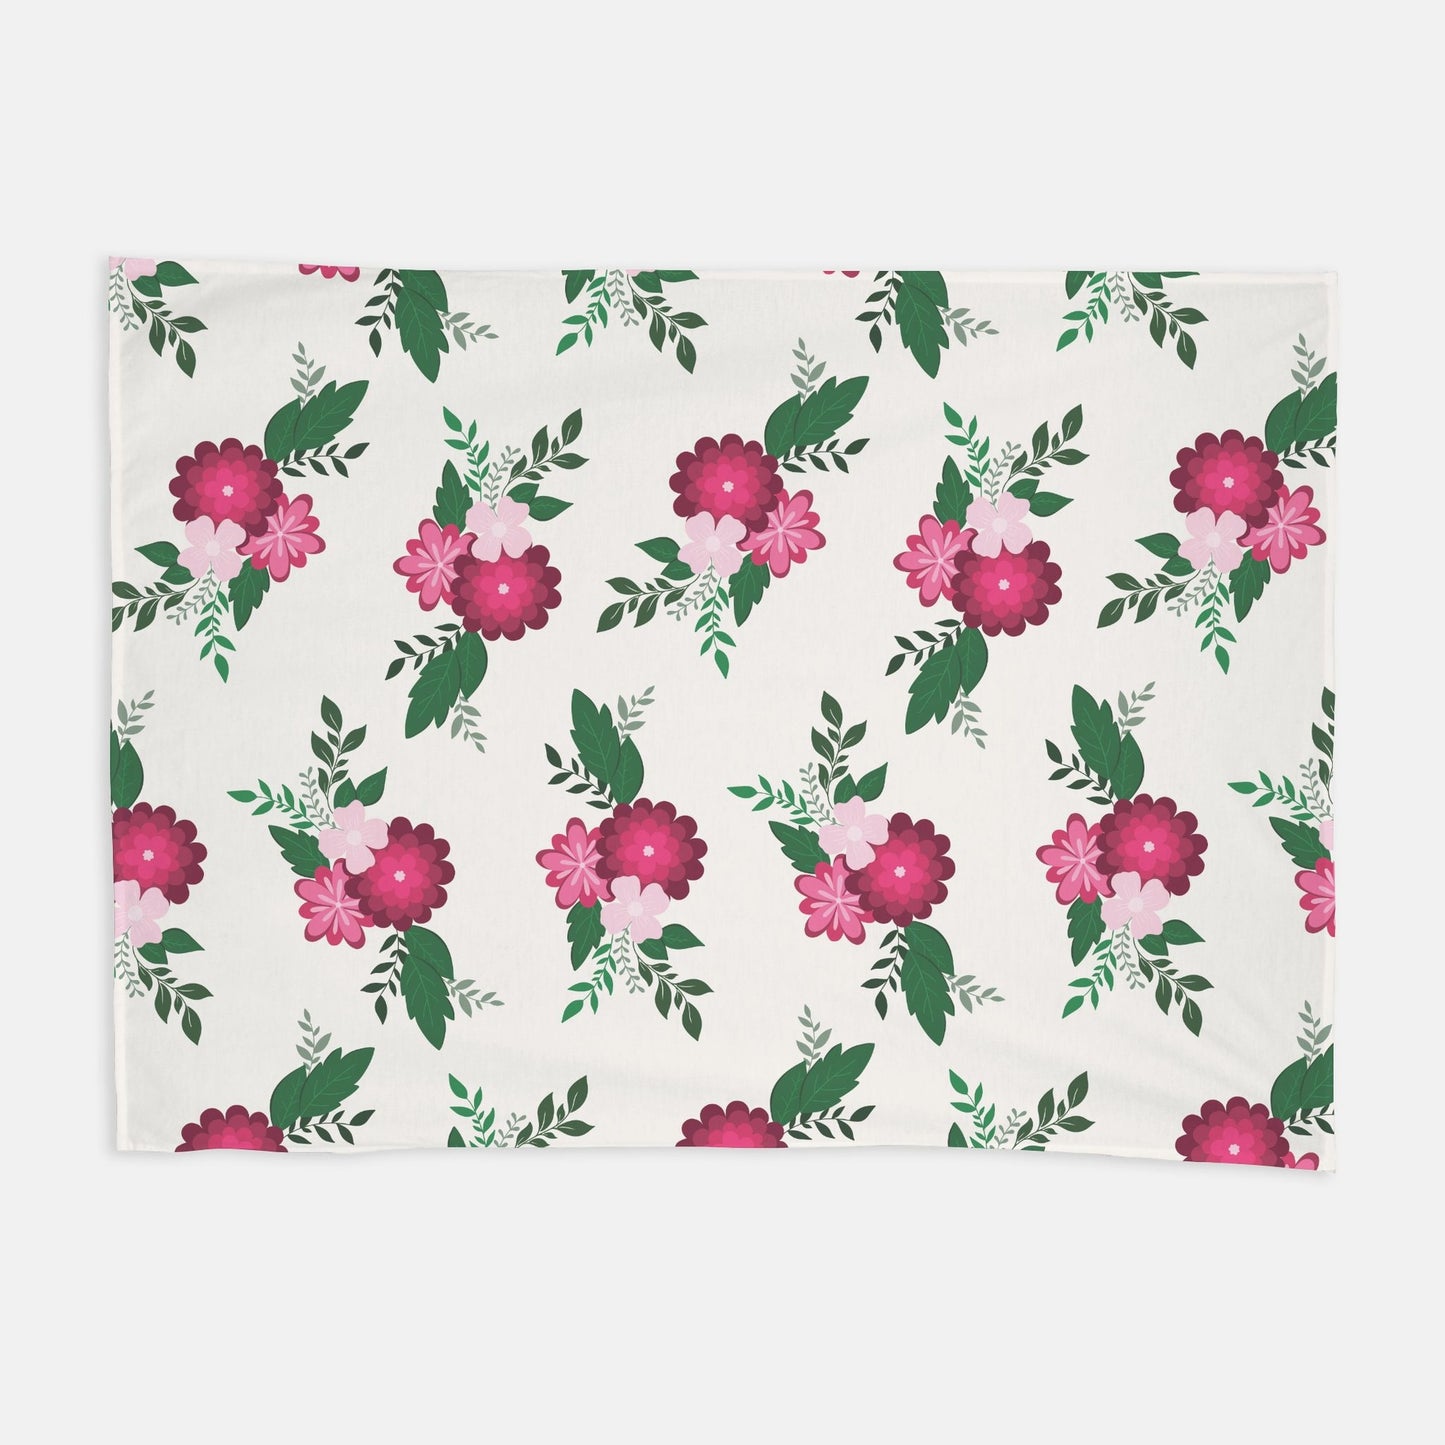 Bunch of Flowers Swaddle Blanket - 30" x 40"